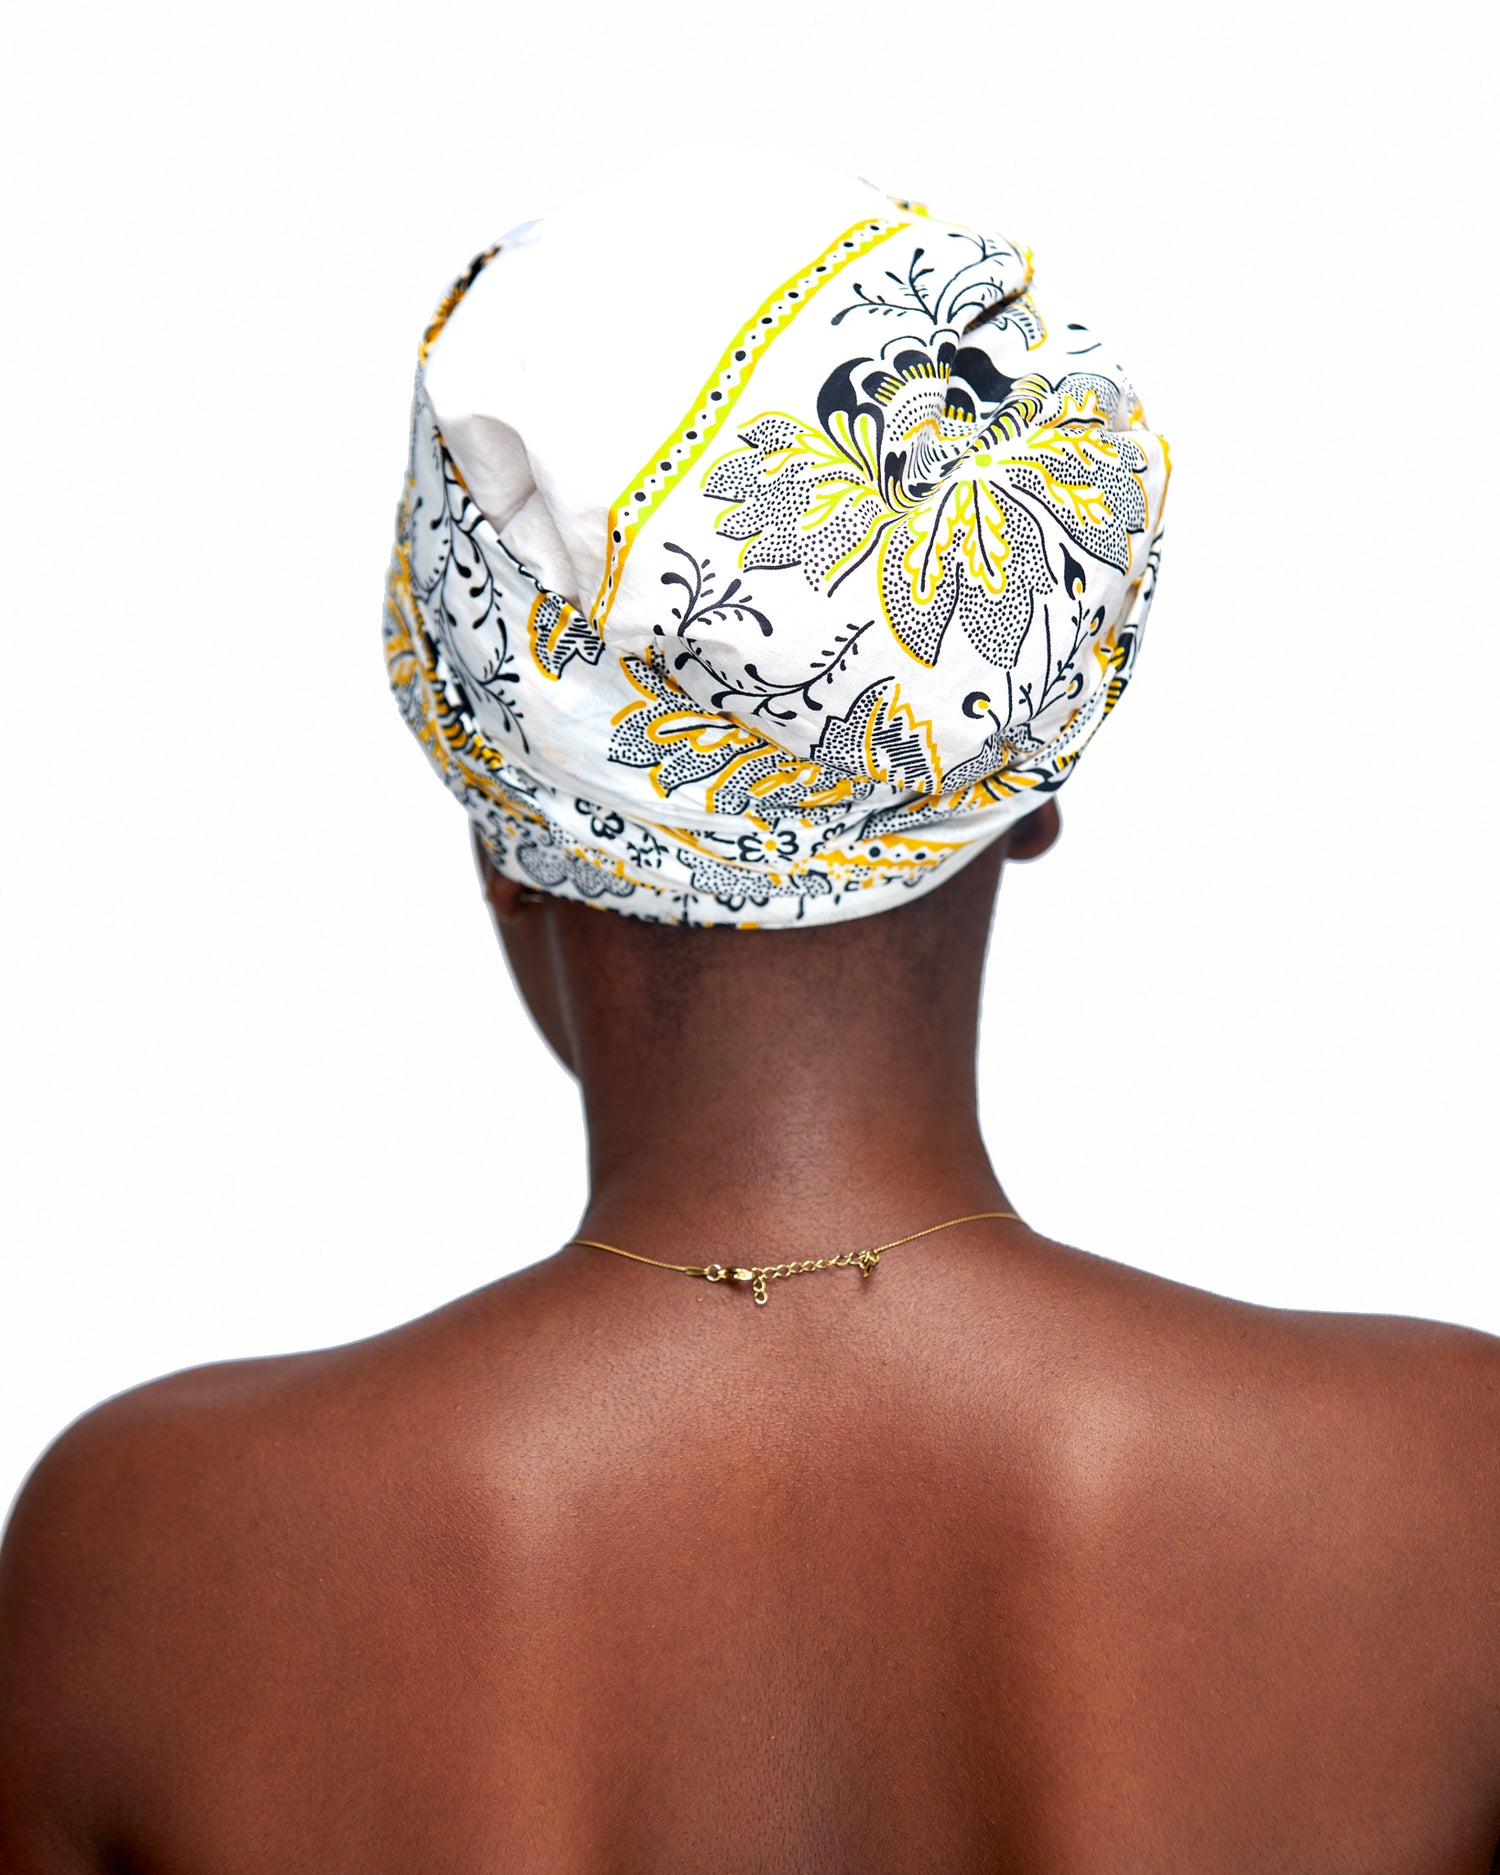 Ankara Wax Print Made of White Yellow And Black Blend of Beautiful Colours And Pattern, Hand Made Elastic Silklined Bonnet With Band